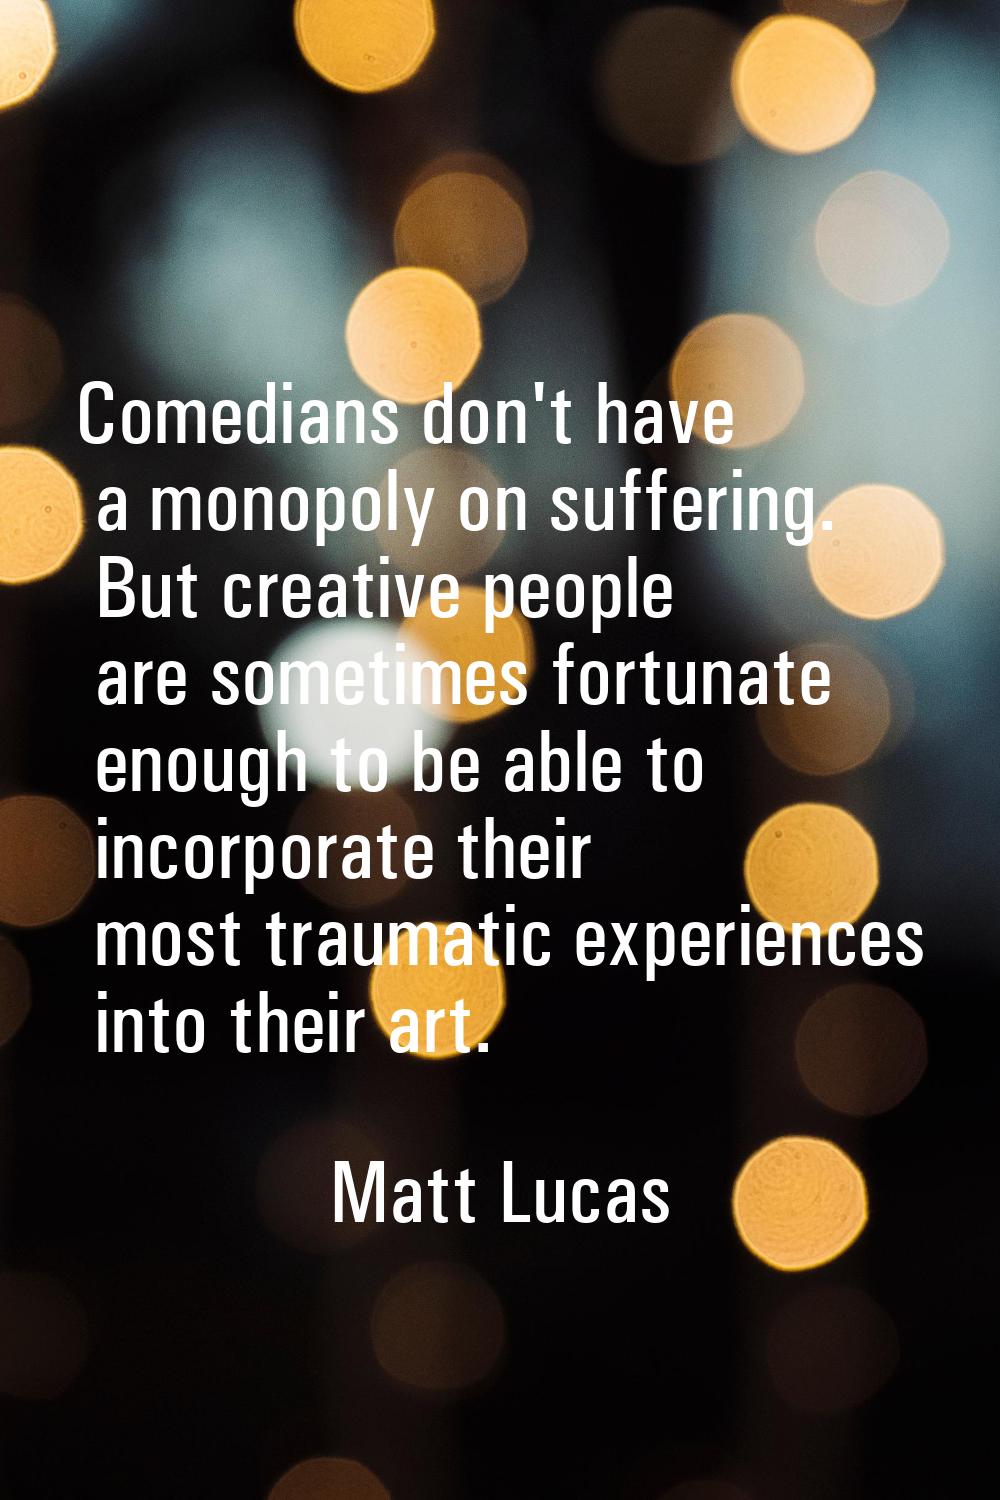 Comedians don't have a monopoly on suffering. But creative people are sometimes fortunate enough to